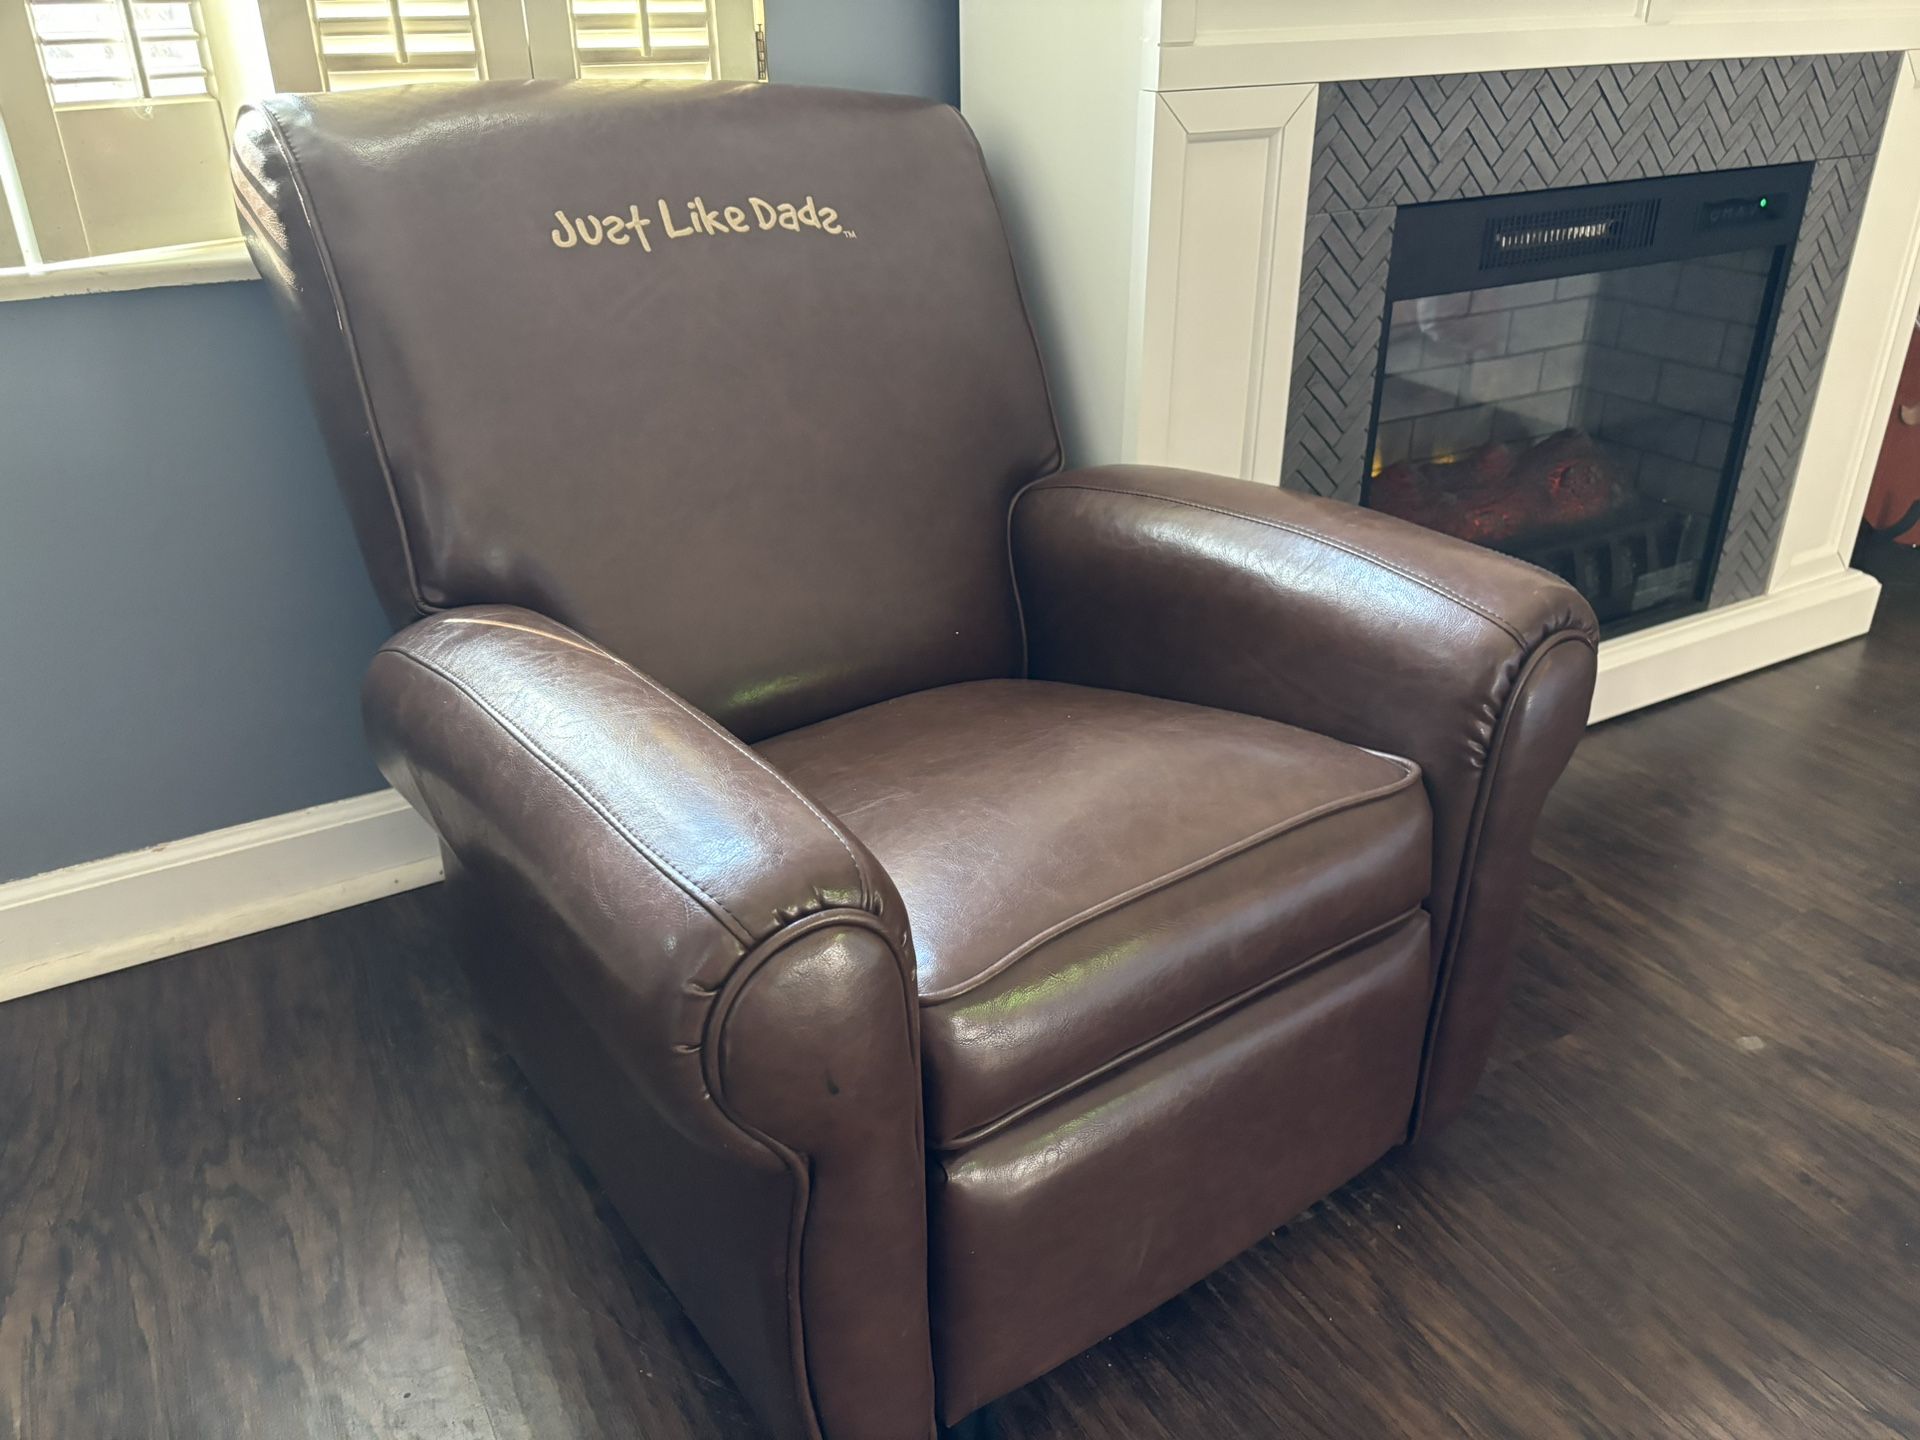 Kids Leather Chair/recliner